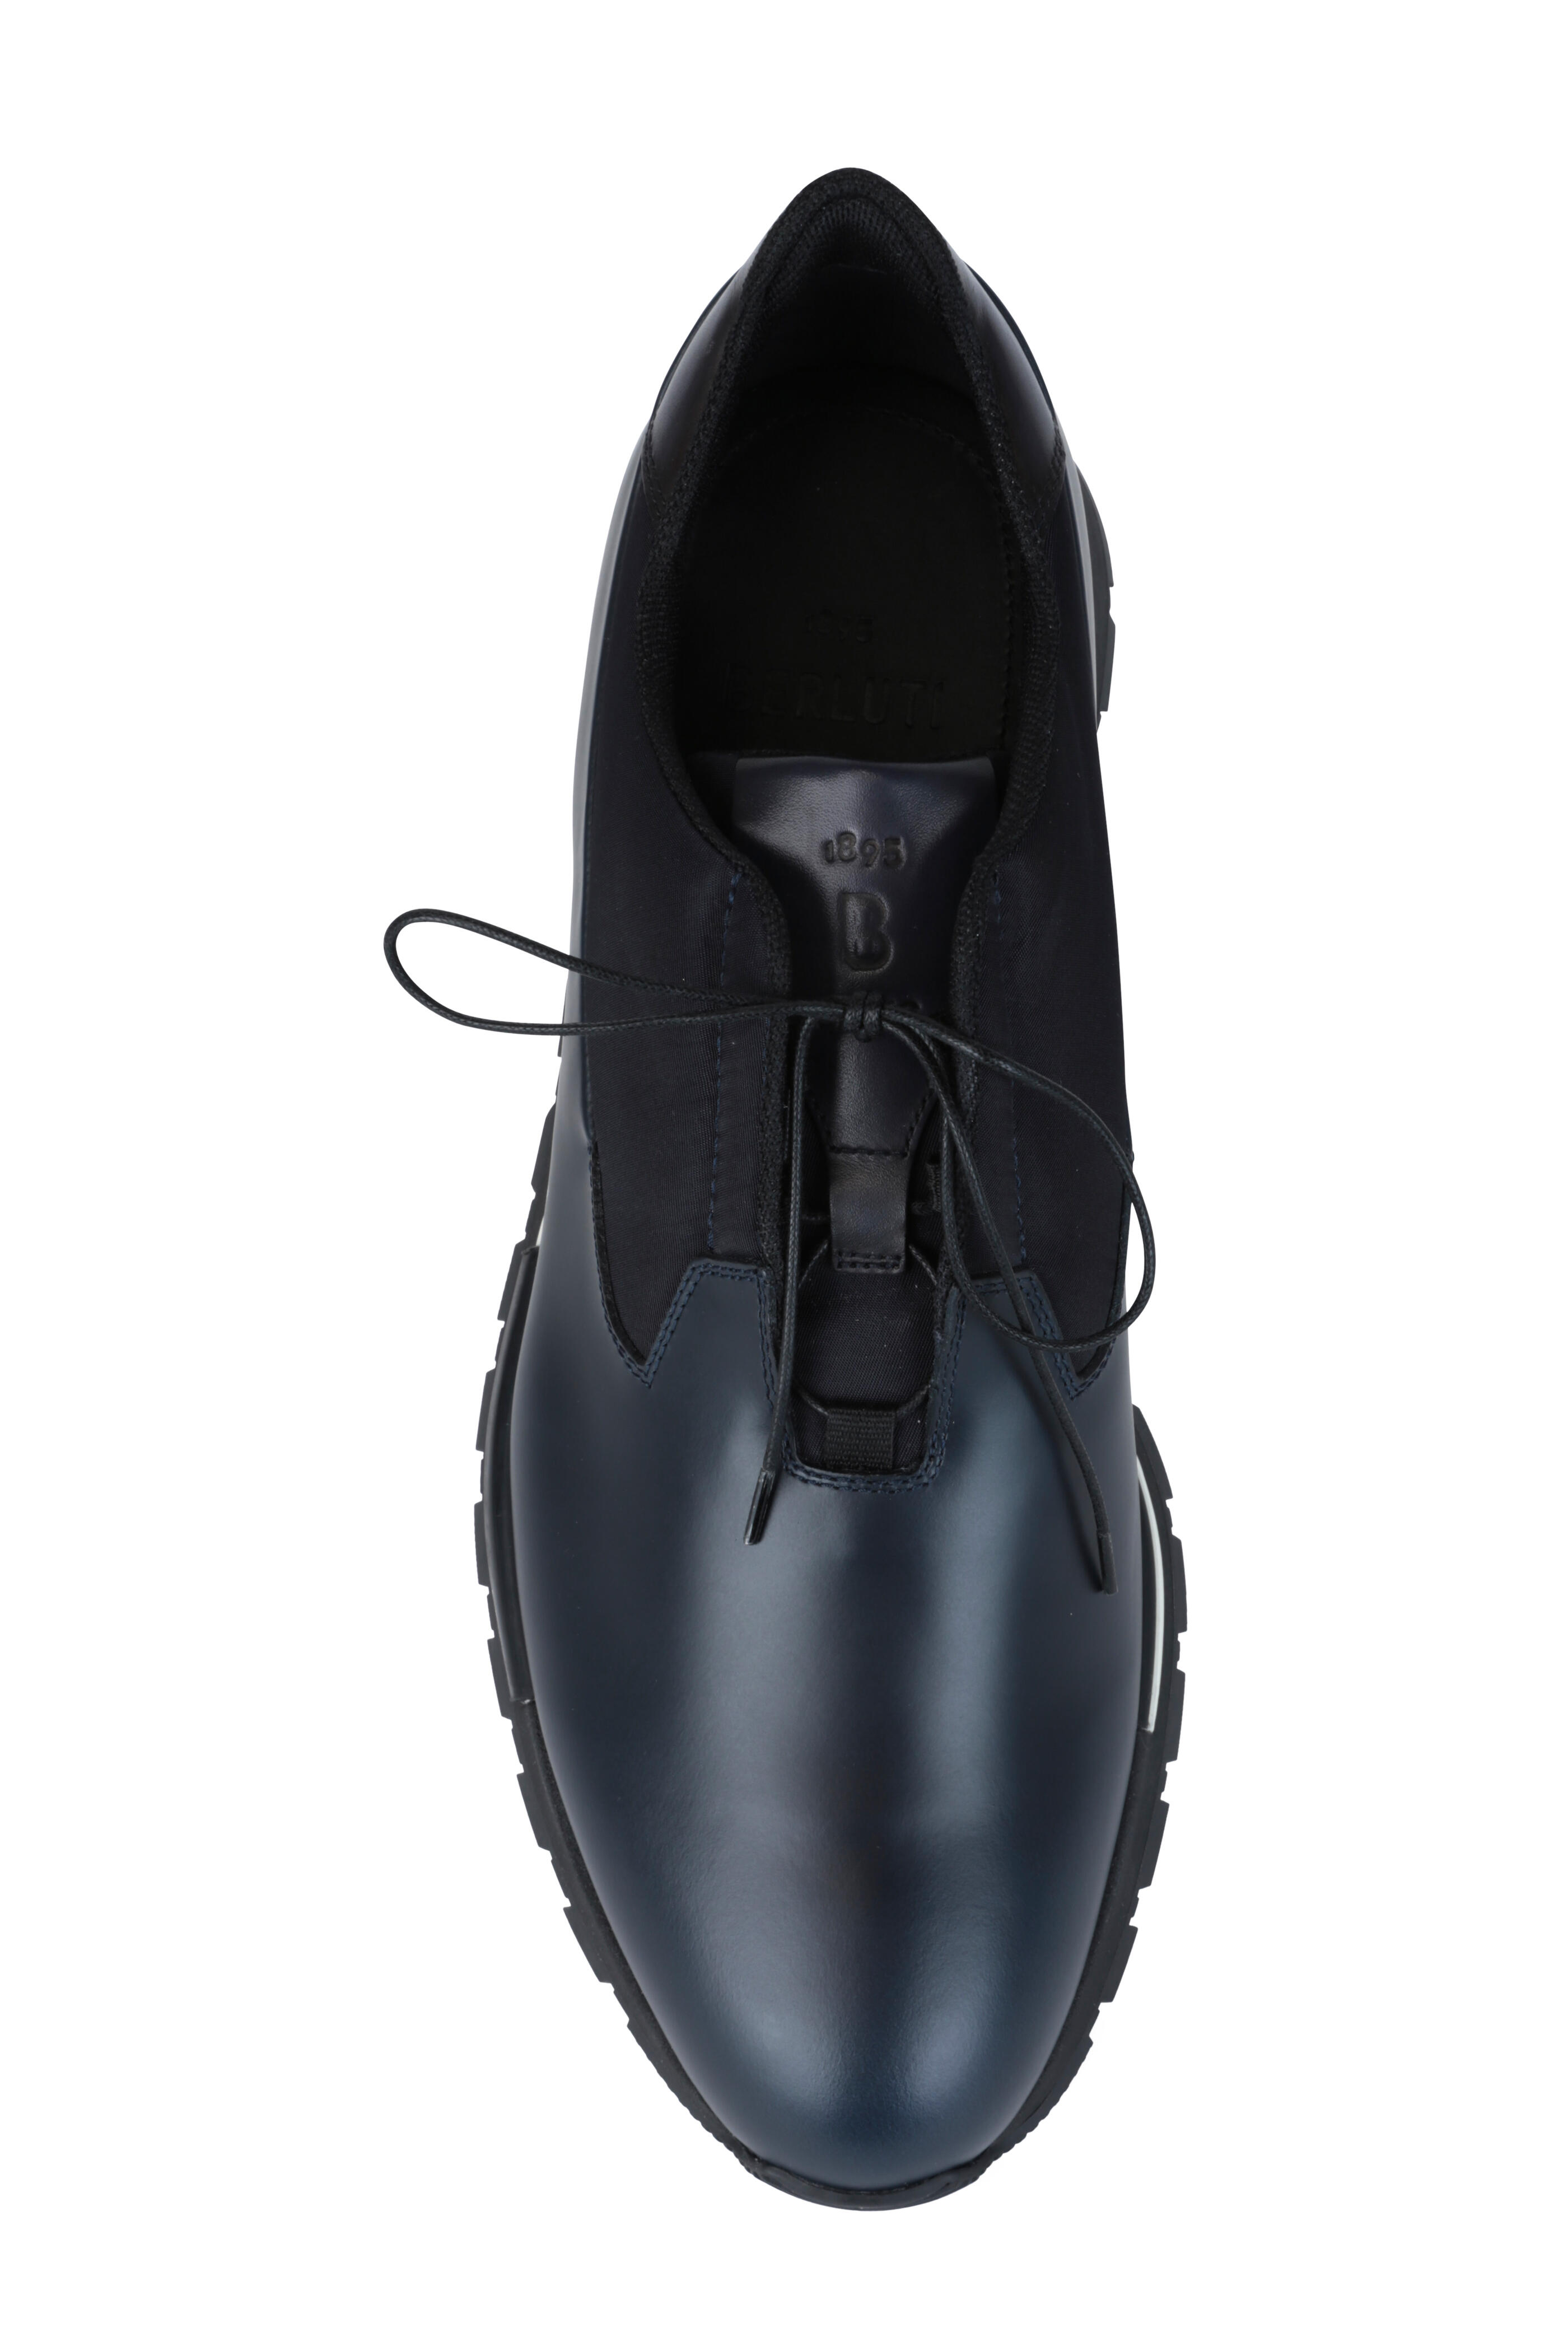 Berluti Torino Fast Track Leather Sneakers, Dress Shoes